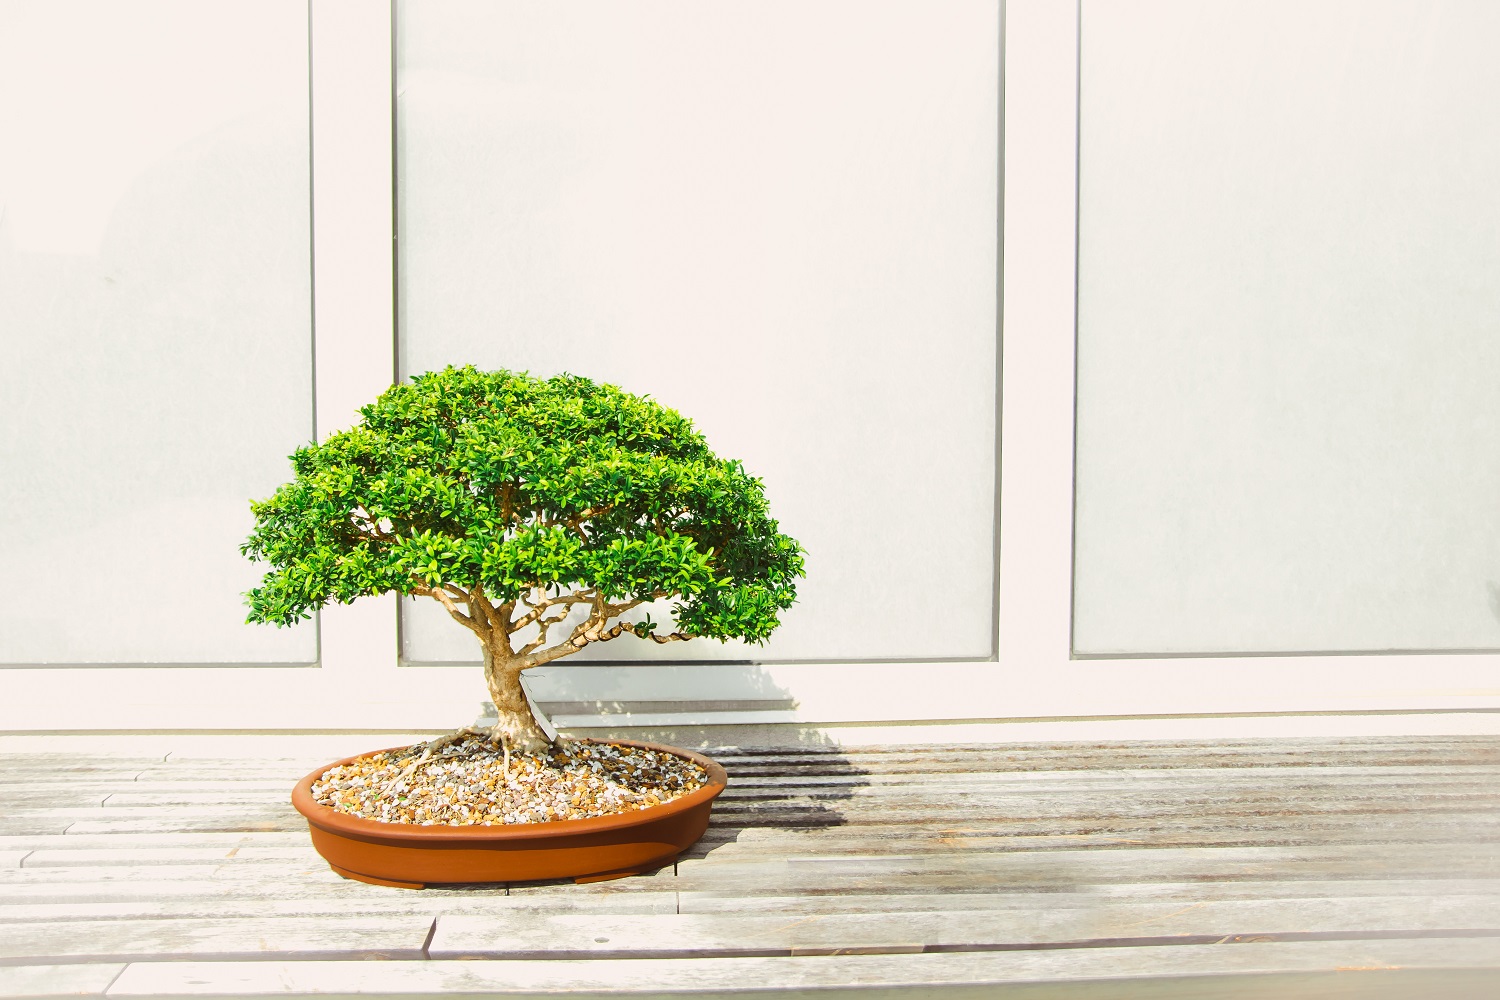 Learn the Art of Bonsai: Check Out These Free Online Courses 32